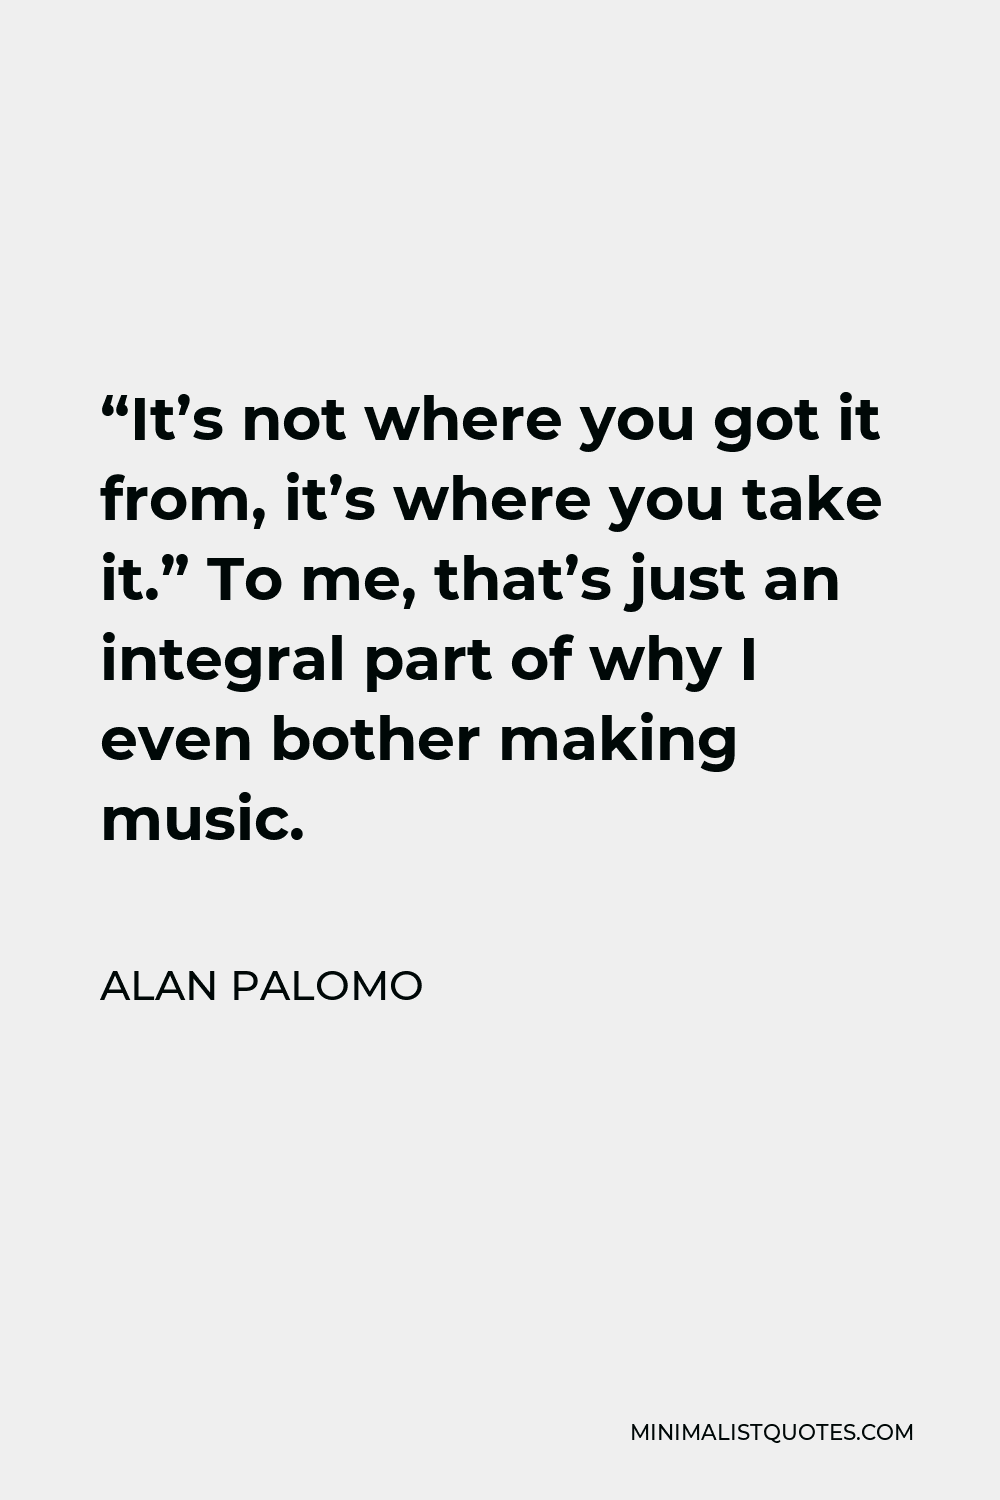 Alan Palomo Quote - “It’s not where you got it from, it’s where you take it.” To me, that’s just an integral part of why I even bother making music.